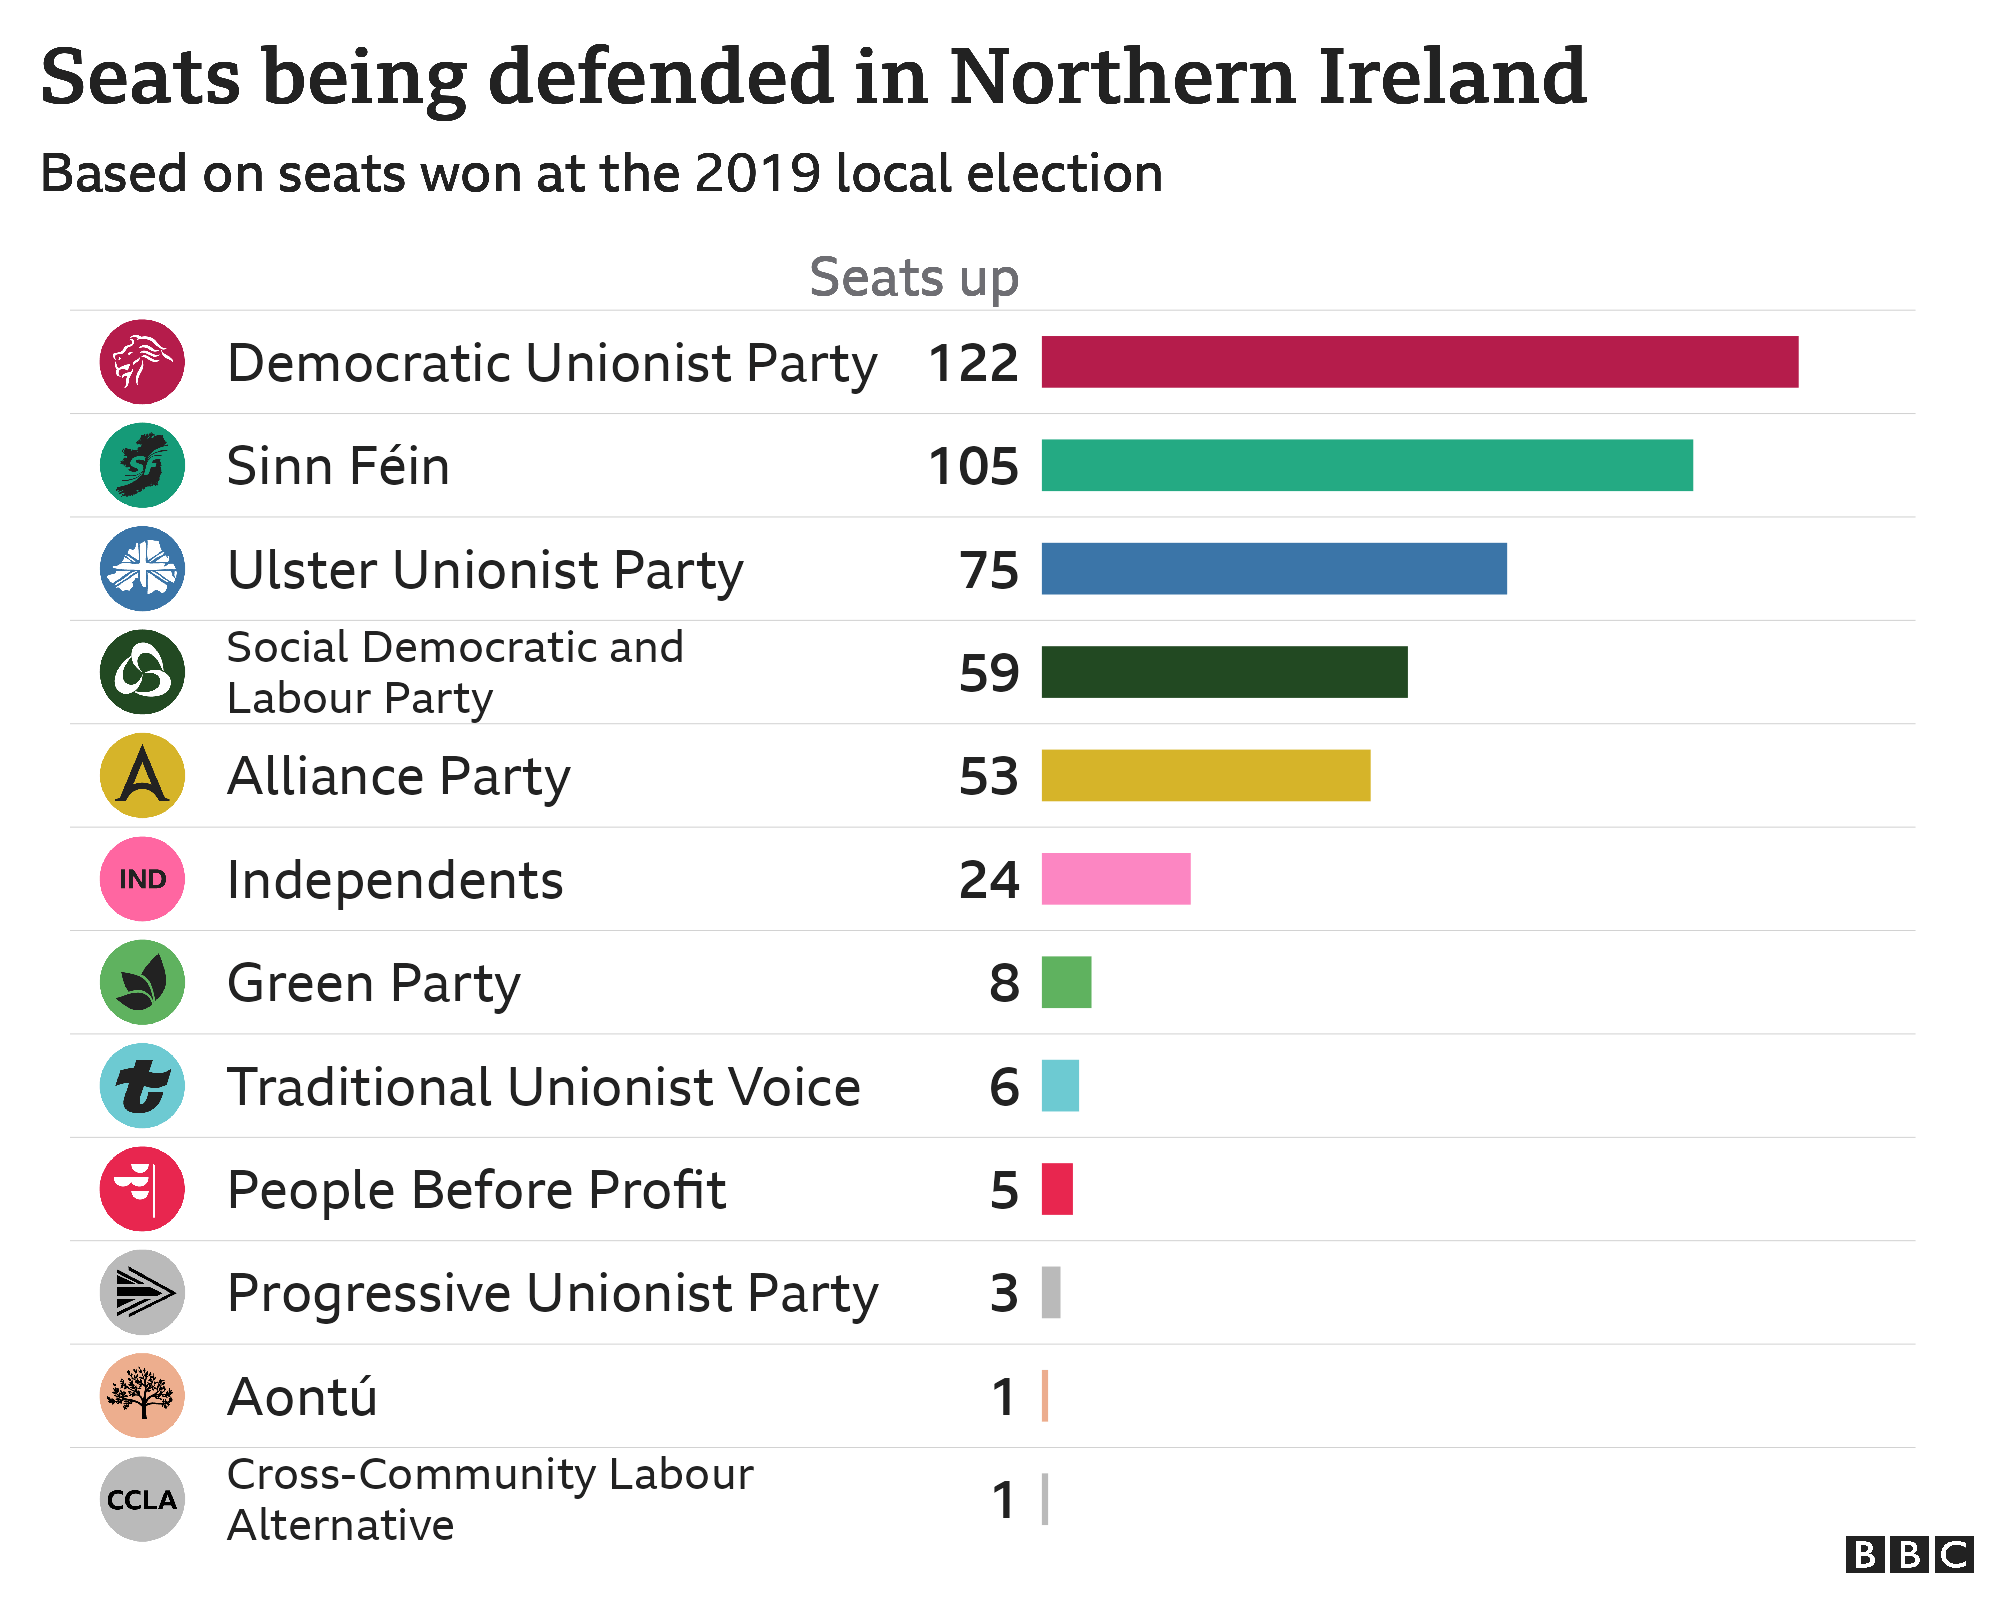 Bar chart showing council seats defended by each party in Northern Ireland, Democratic Unionist Party 122, Sinn Fein 105, Ulster Unionist Party 75, Social Democratic and Labour Party 59, Alliance Party 53, Independents 24, Green Party 8, Traditional Unionist Voice 6, People Before Profit 5, Progressive Unionist Party 3, Aontu 1, Cross-Community Labour Alternative 1